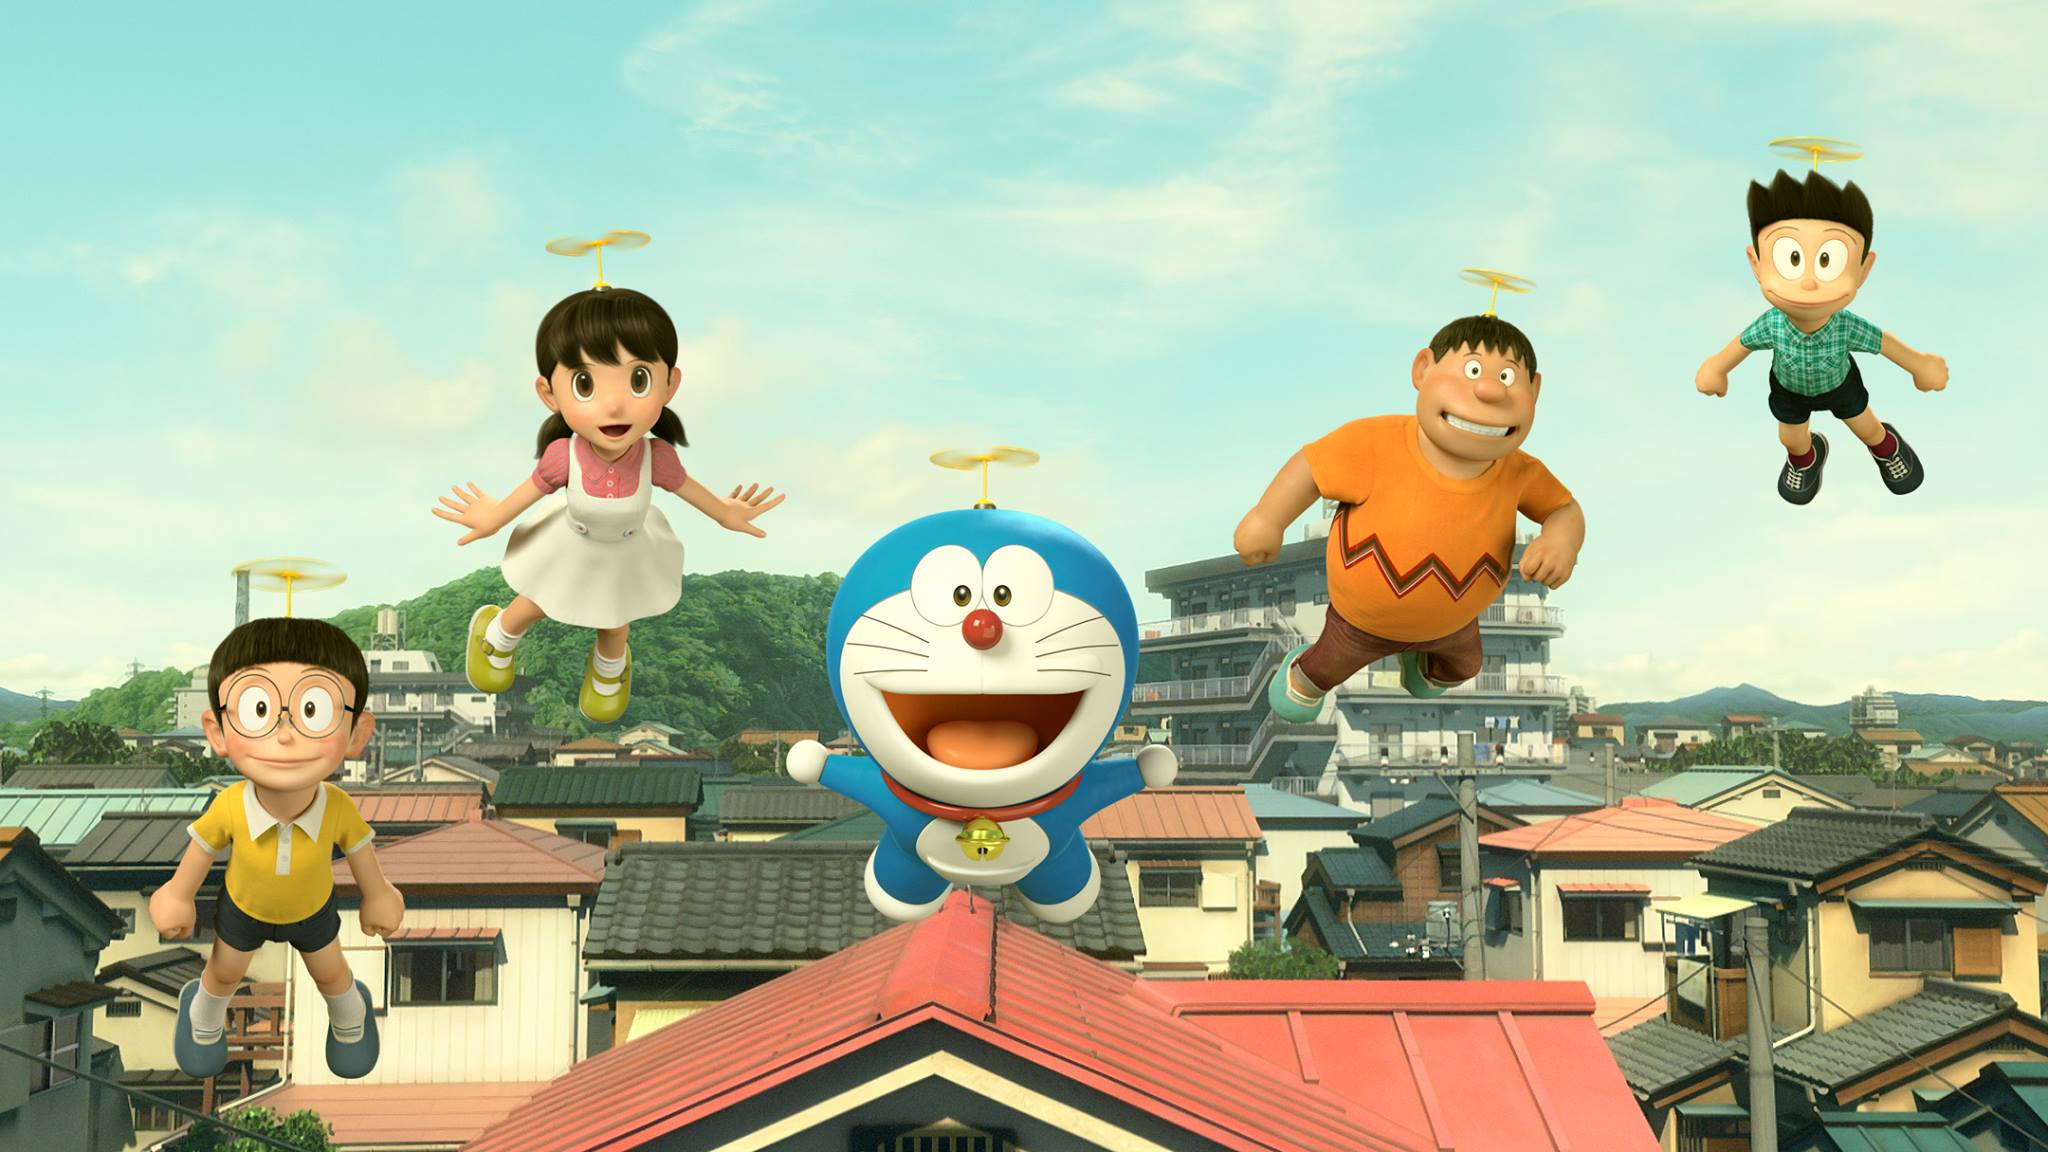 Hype&;s Must Watch: “Stand By Me: Doraemon”